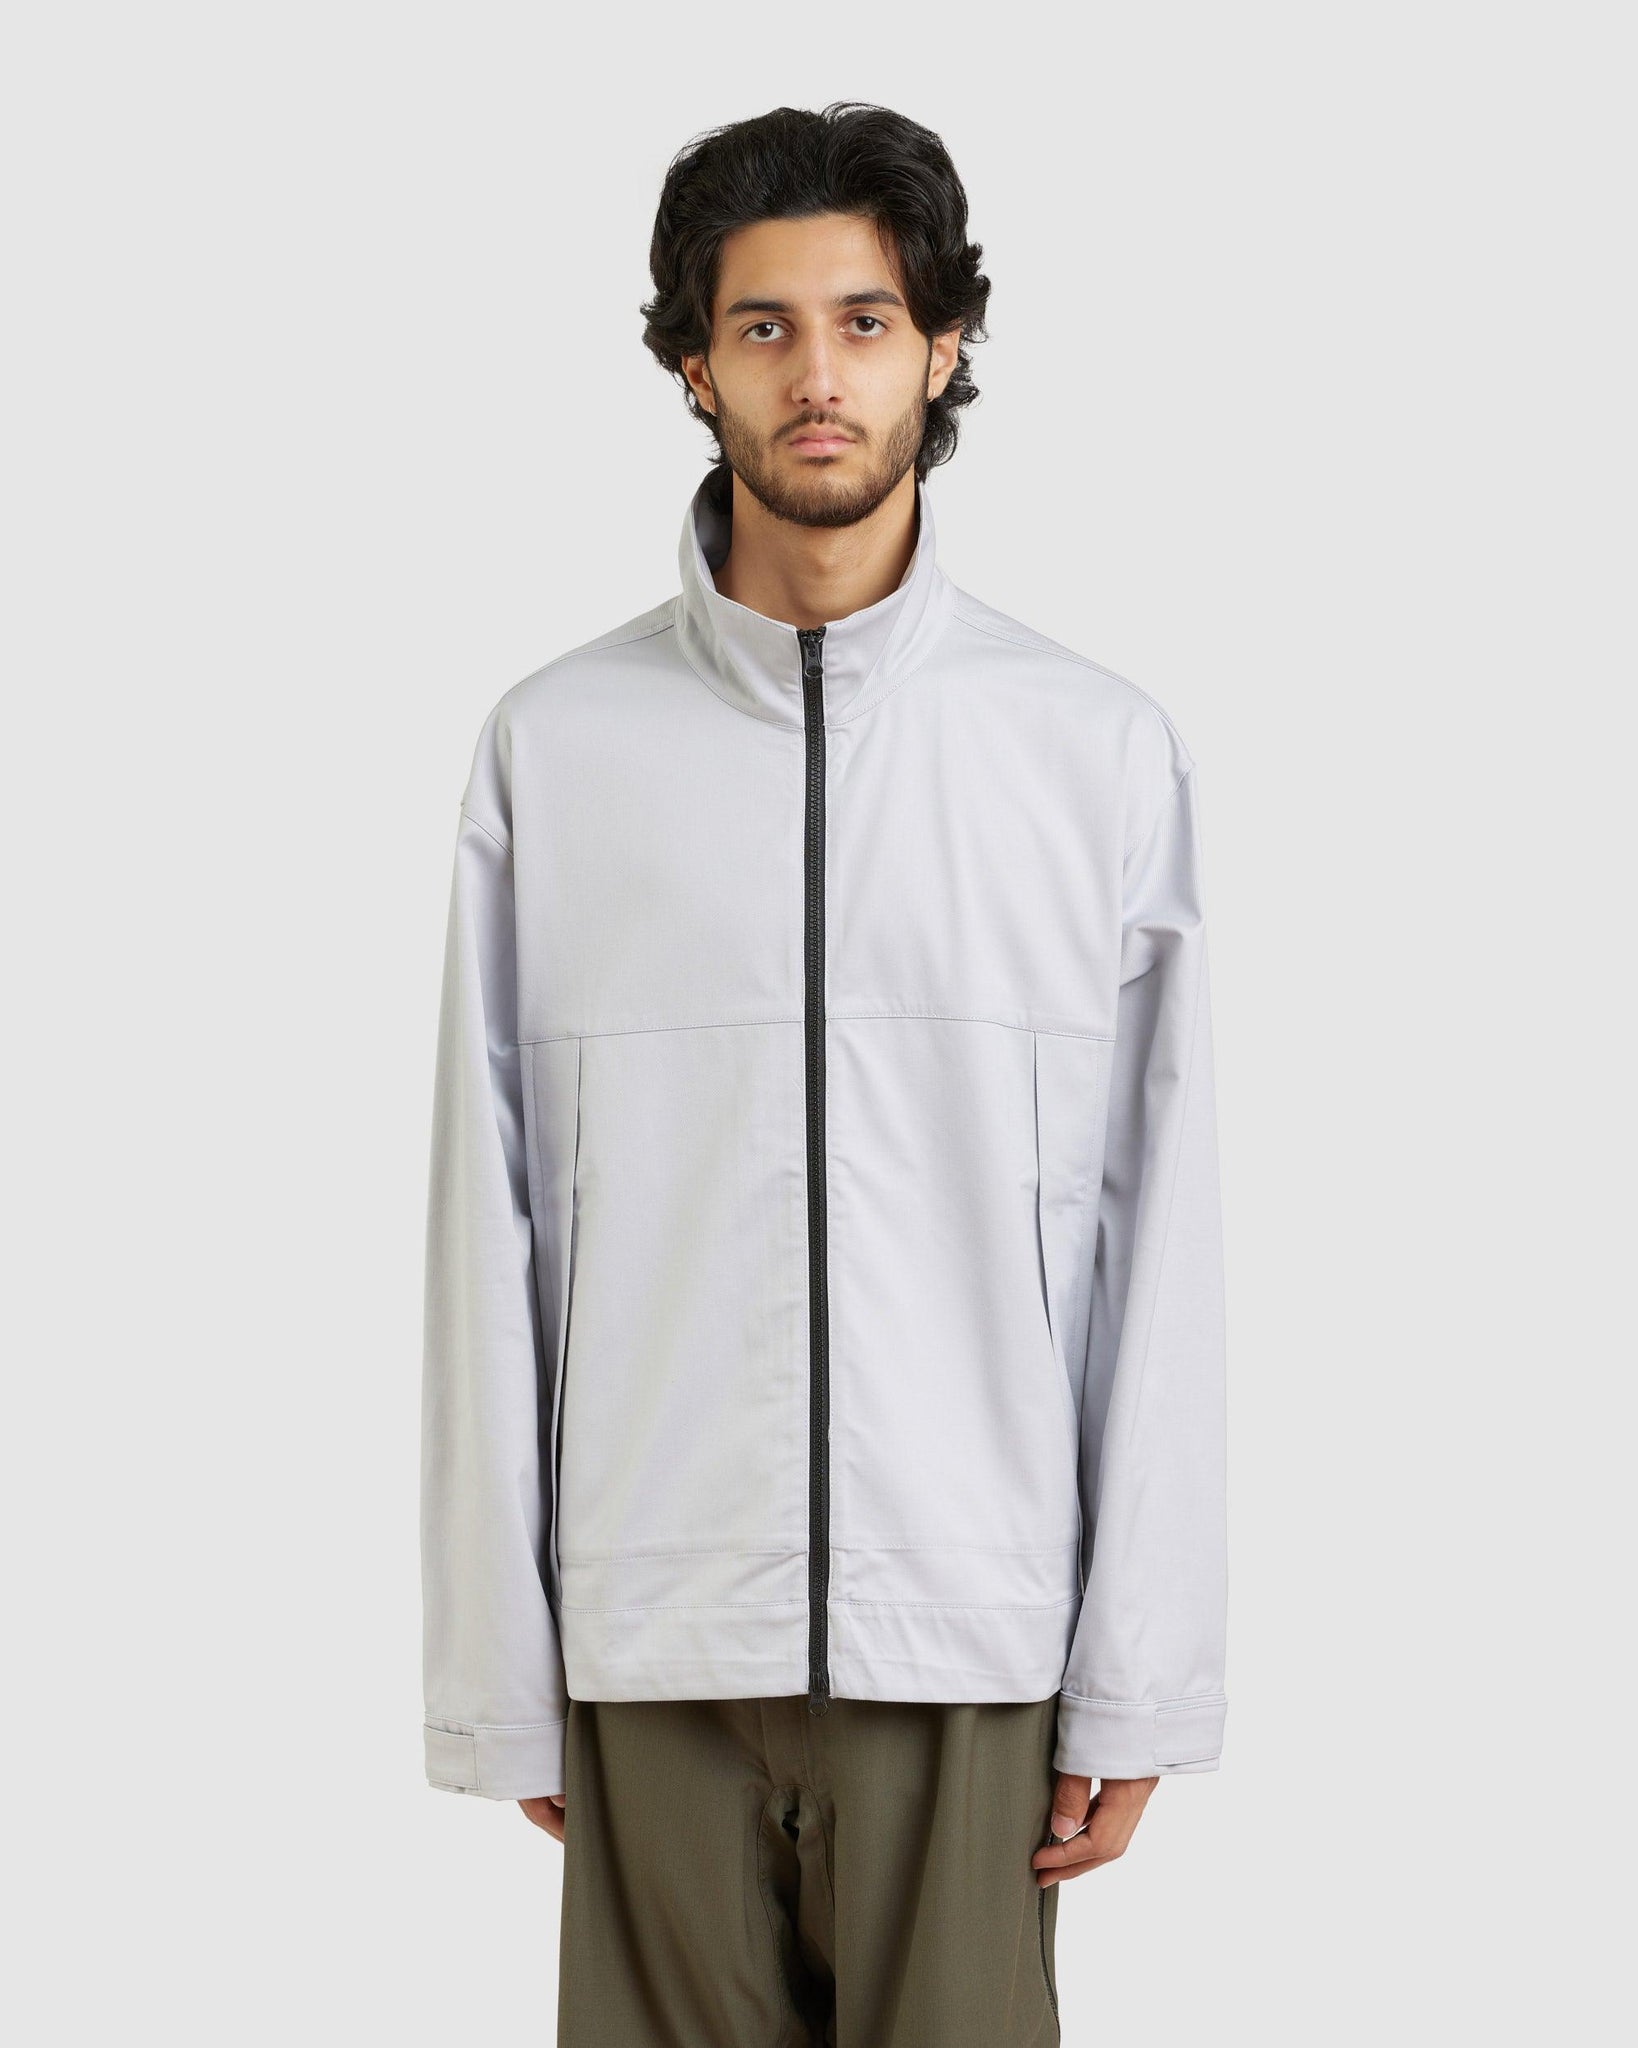 Klopman New Arena Stock Jacket - {{ collection.title }} - Chinatown Country Club 